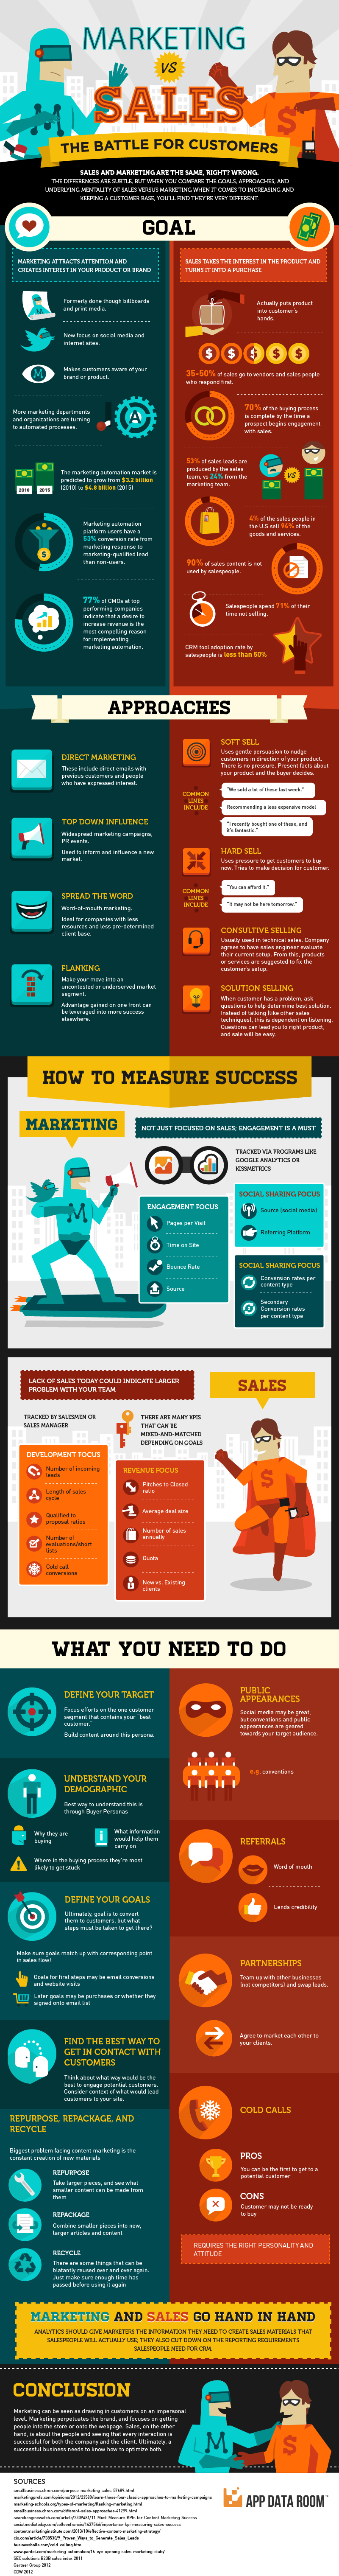 Marketing vs Sales: The Battle for Customers